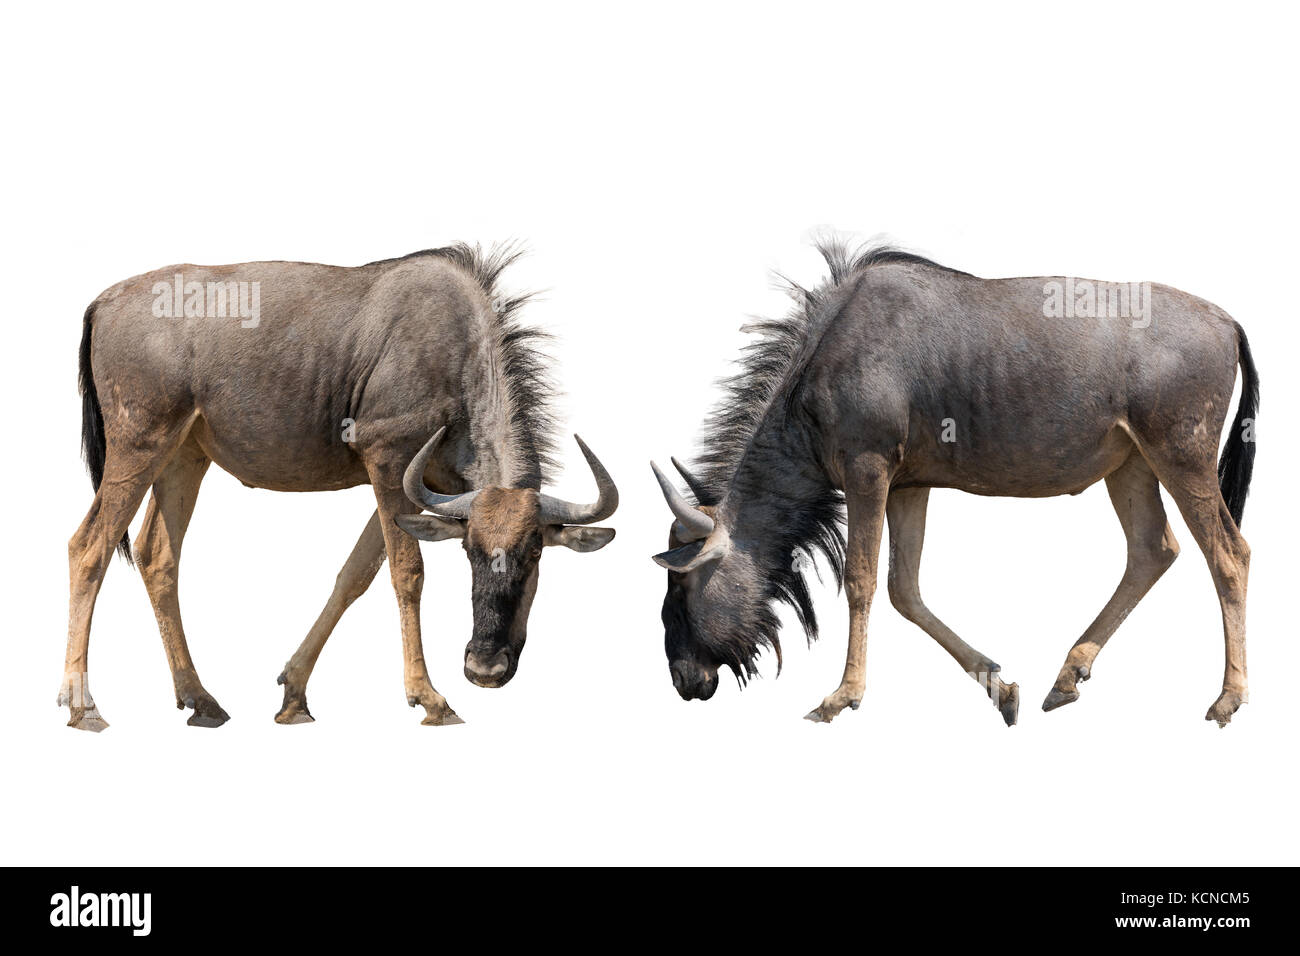 Set of two blue wildebeests portraits Stock Photo